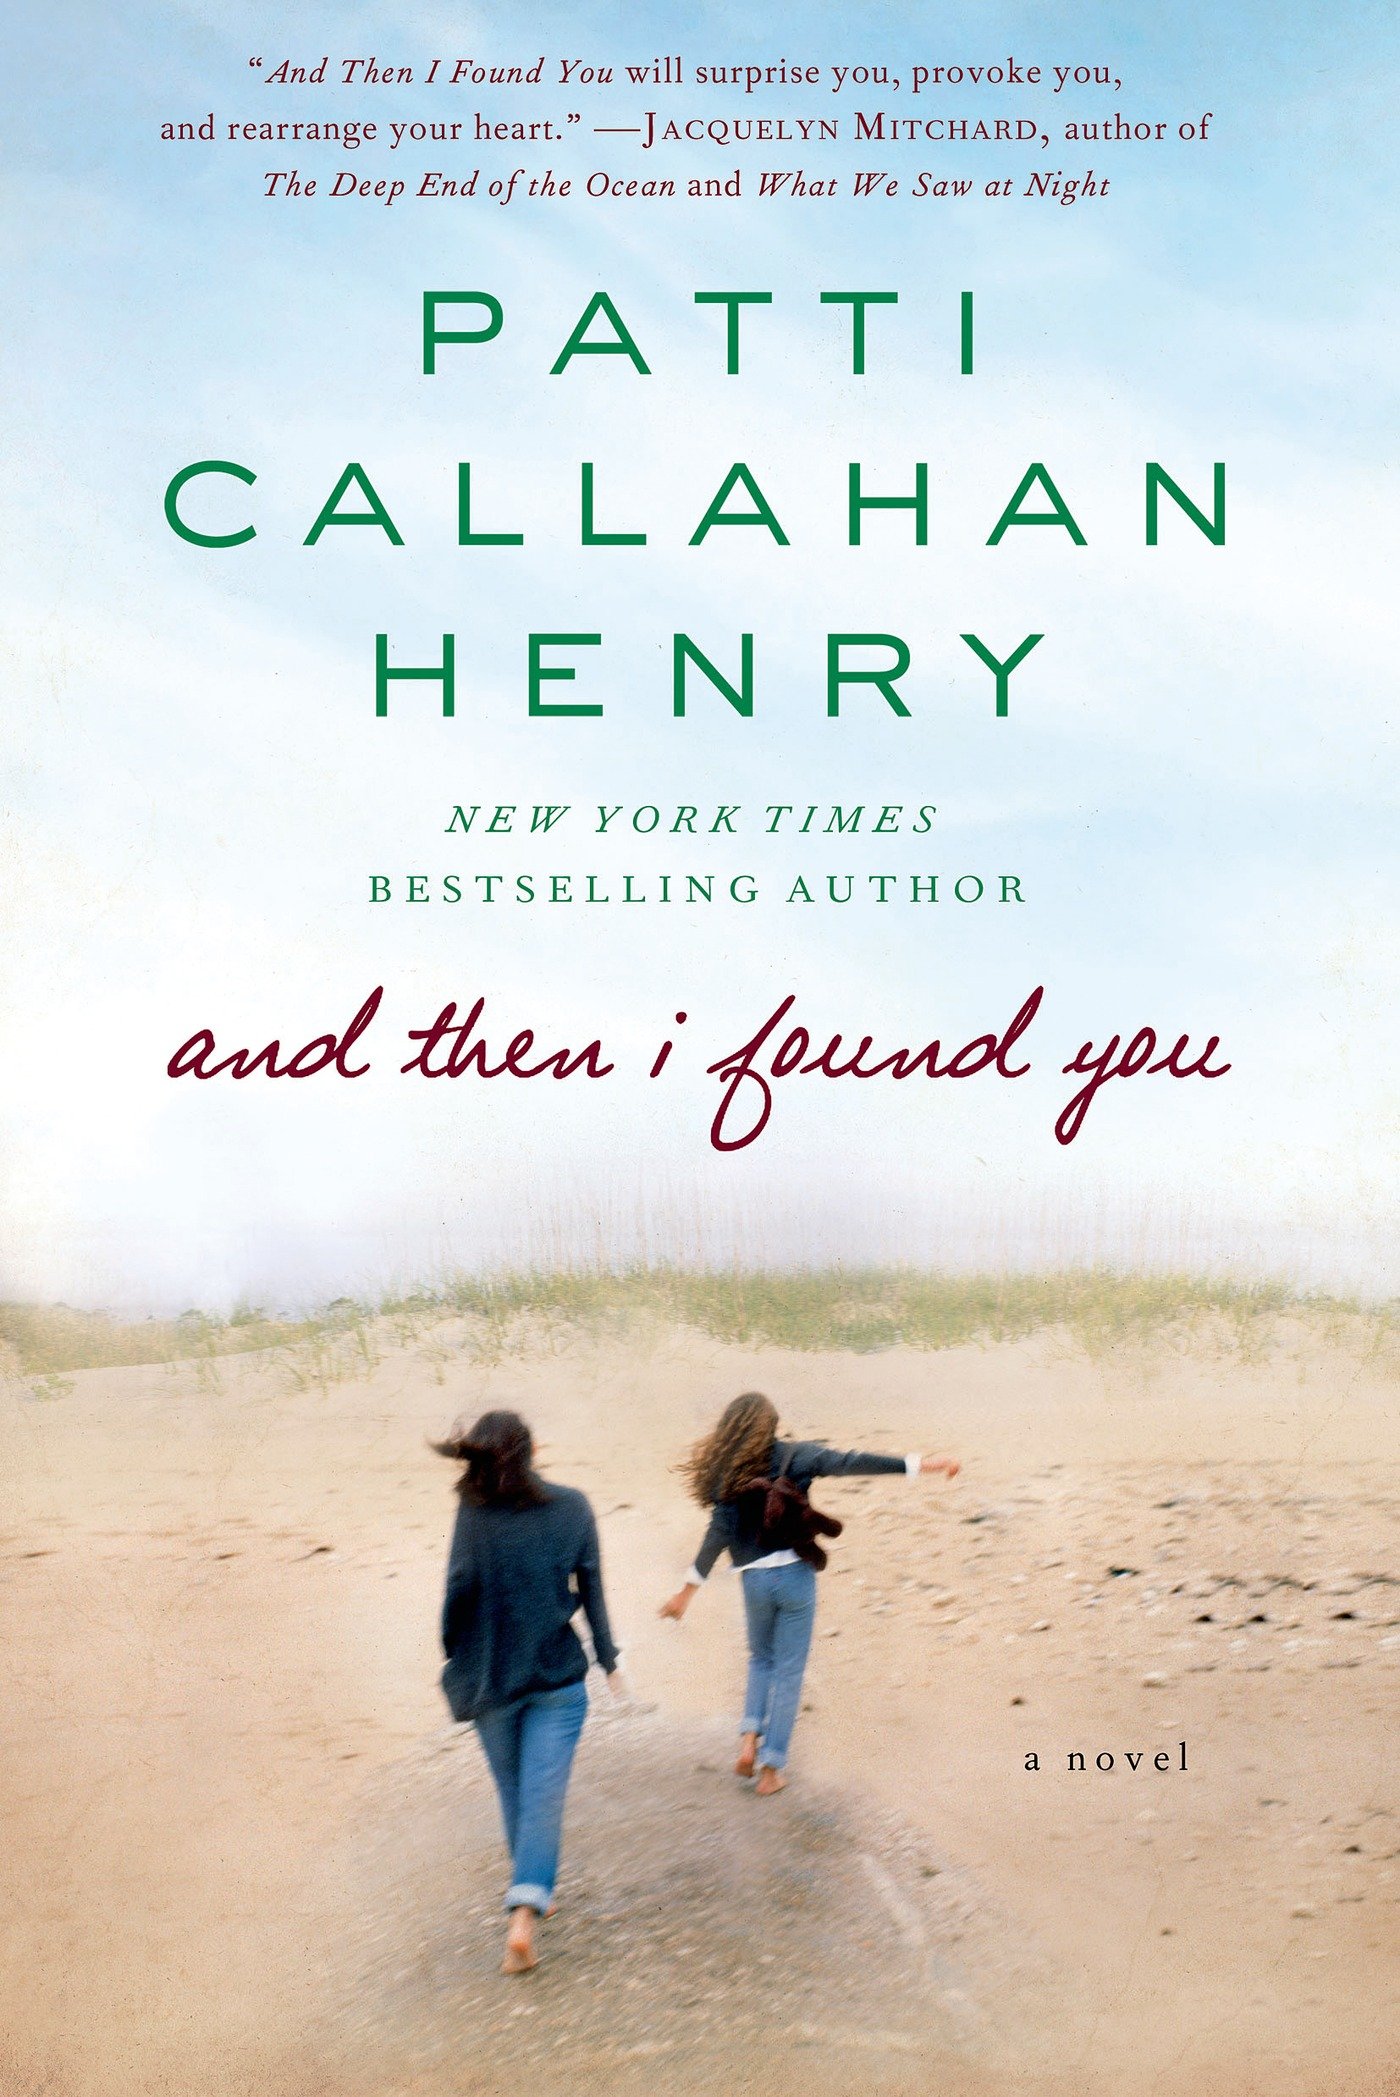 And Then I Found You: A Novel: Patti Callahan Henry: 9781250049773 ...